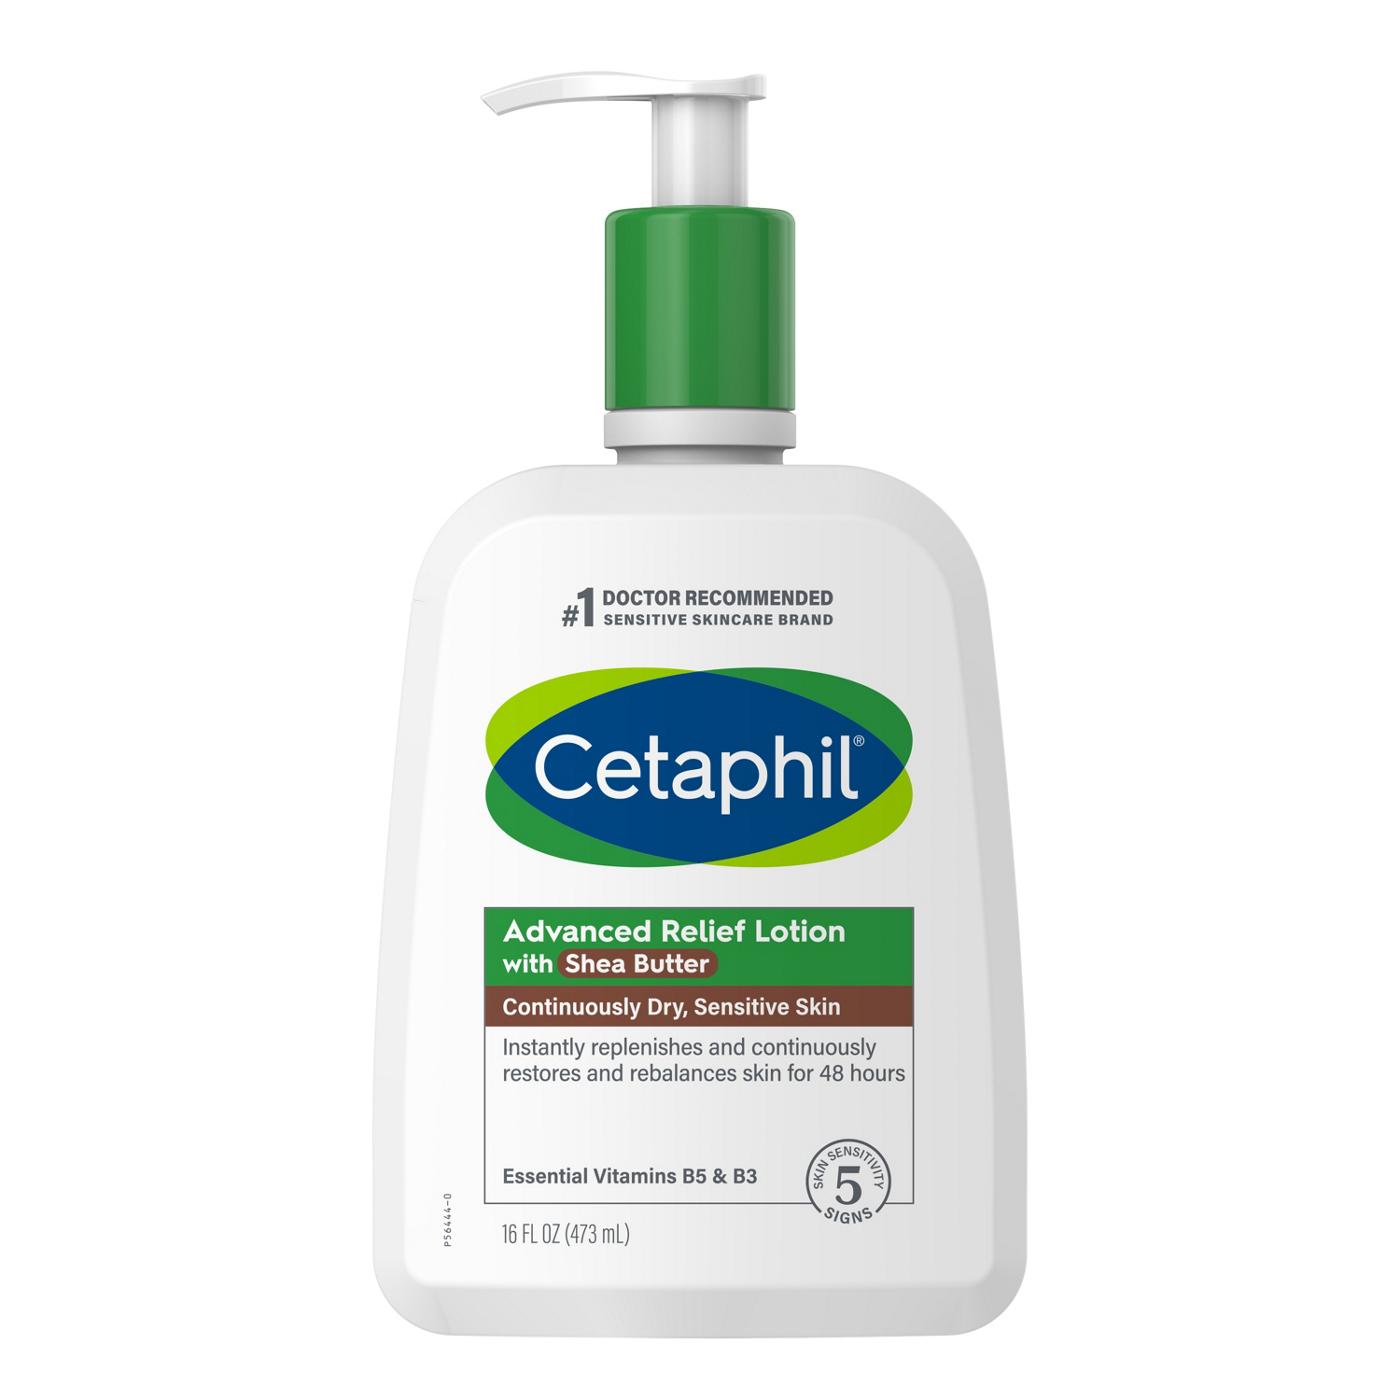 Cetaphil Advanced Relief Lotion; image 1 of 7